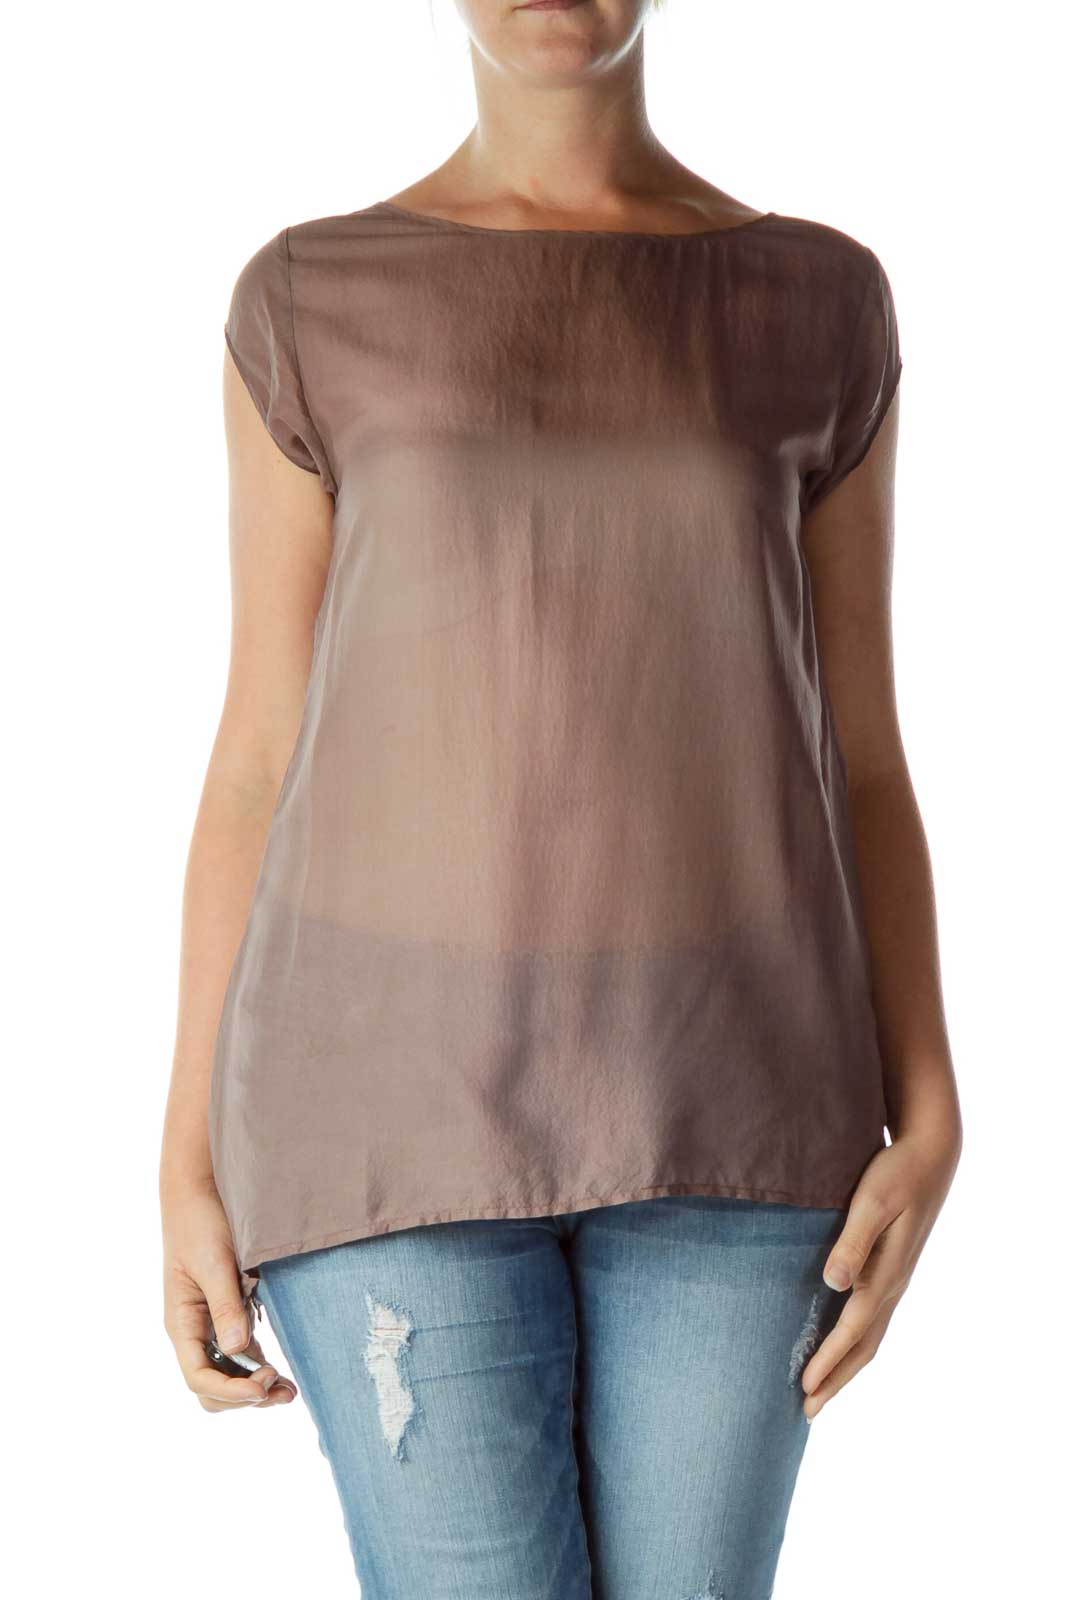 Brown Sheer Blouse Front